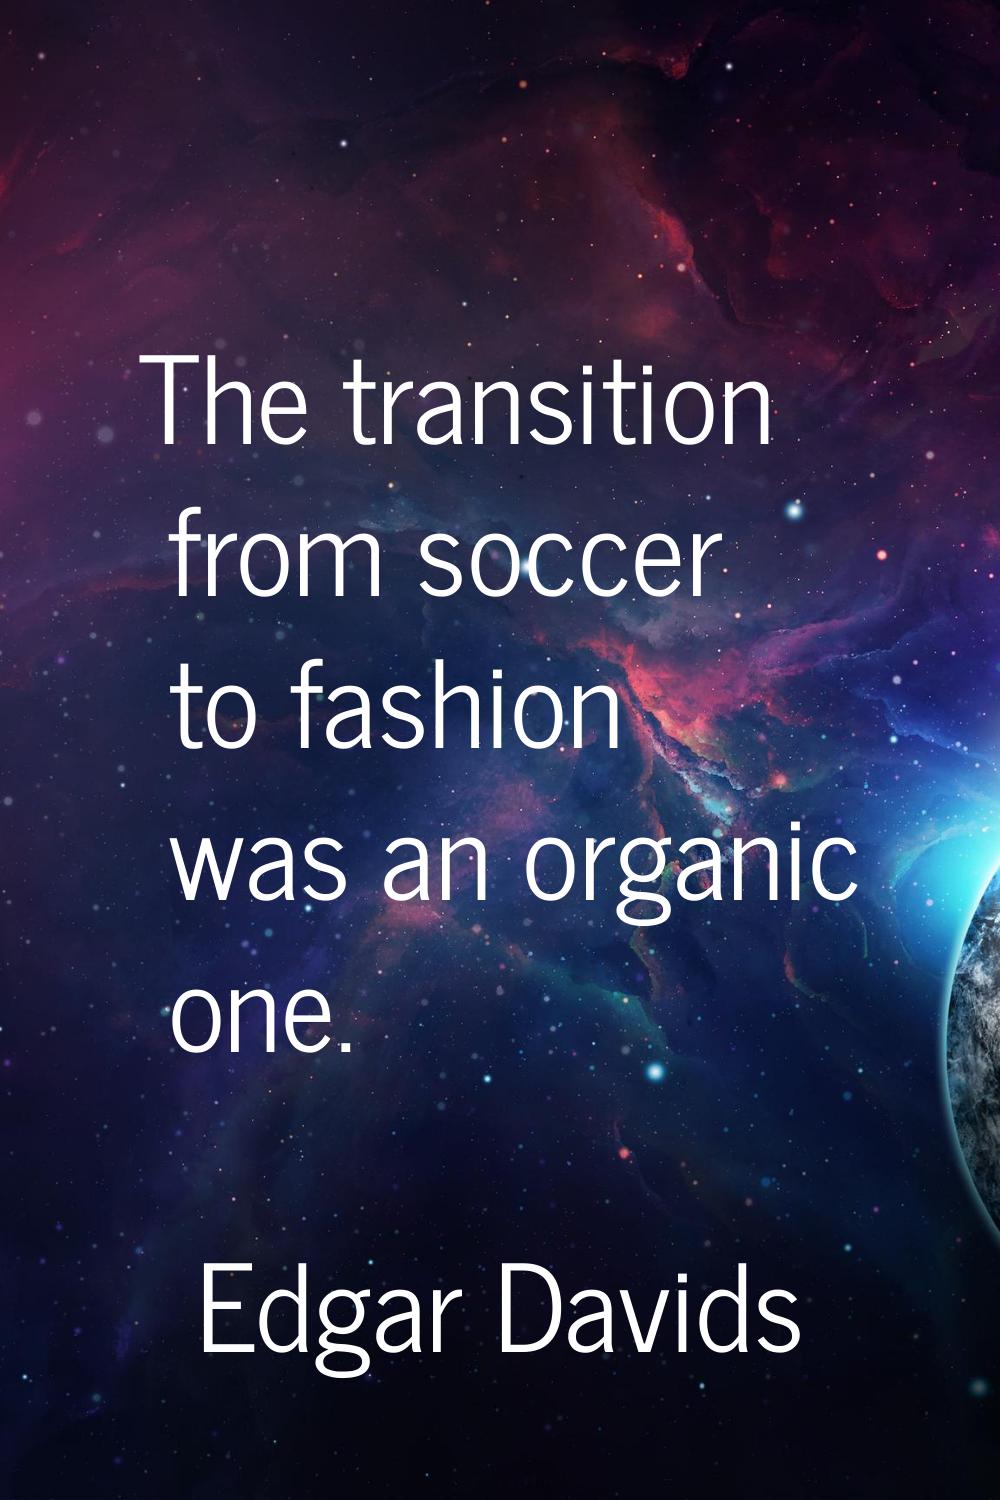 The transition from soccer to fashion was an organic one.